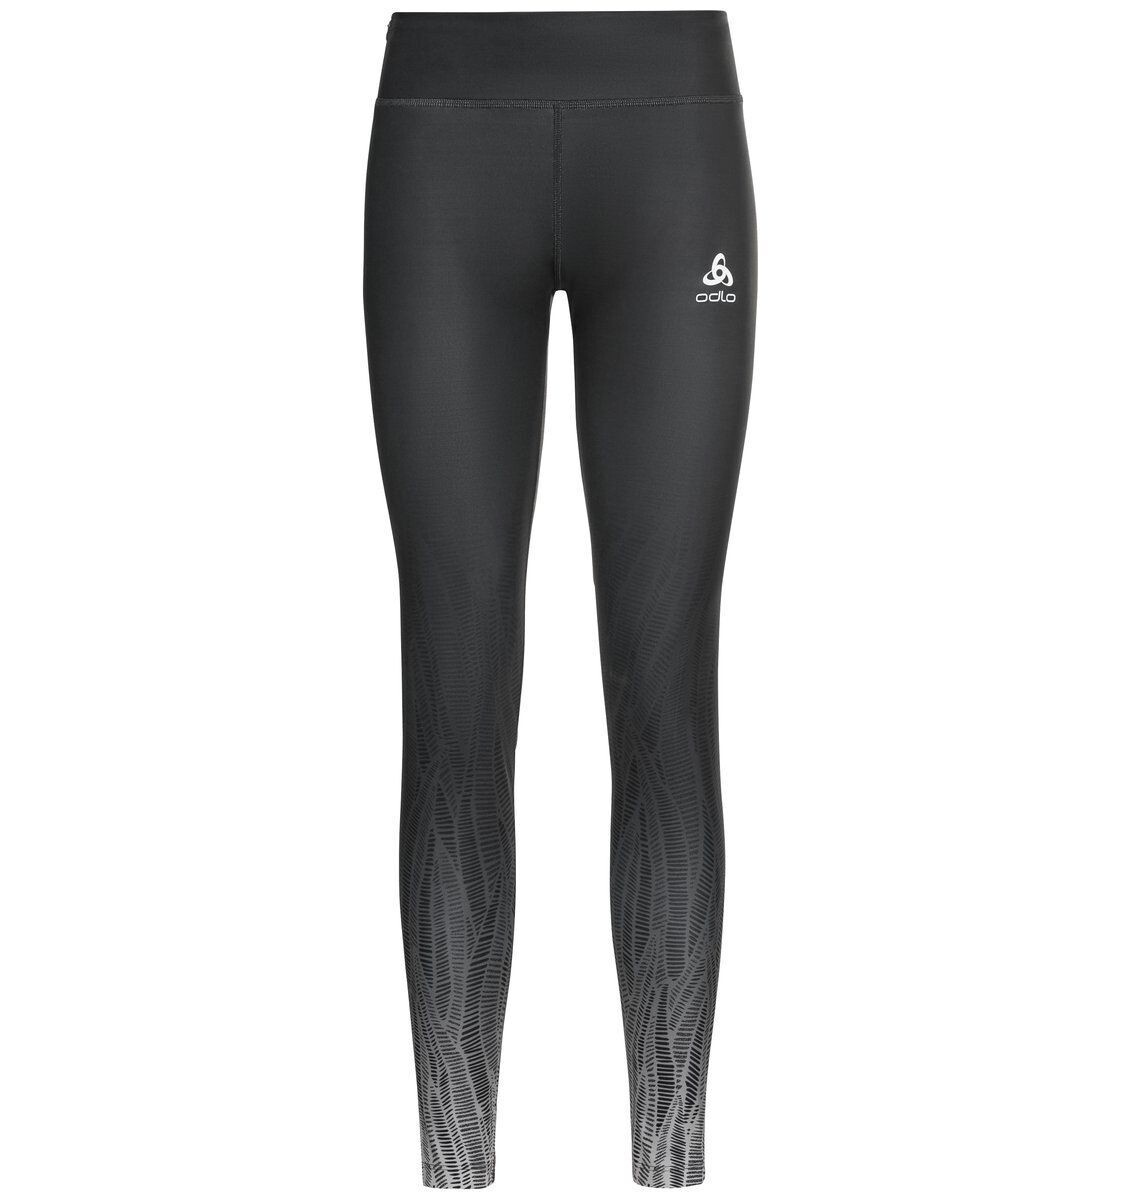 Odlo Tights ZEROWEIGHT PRINT